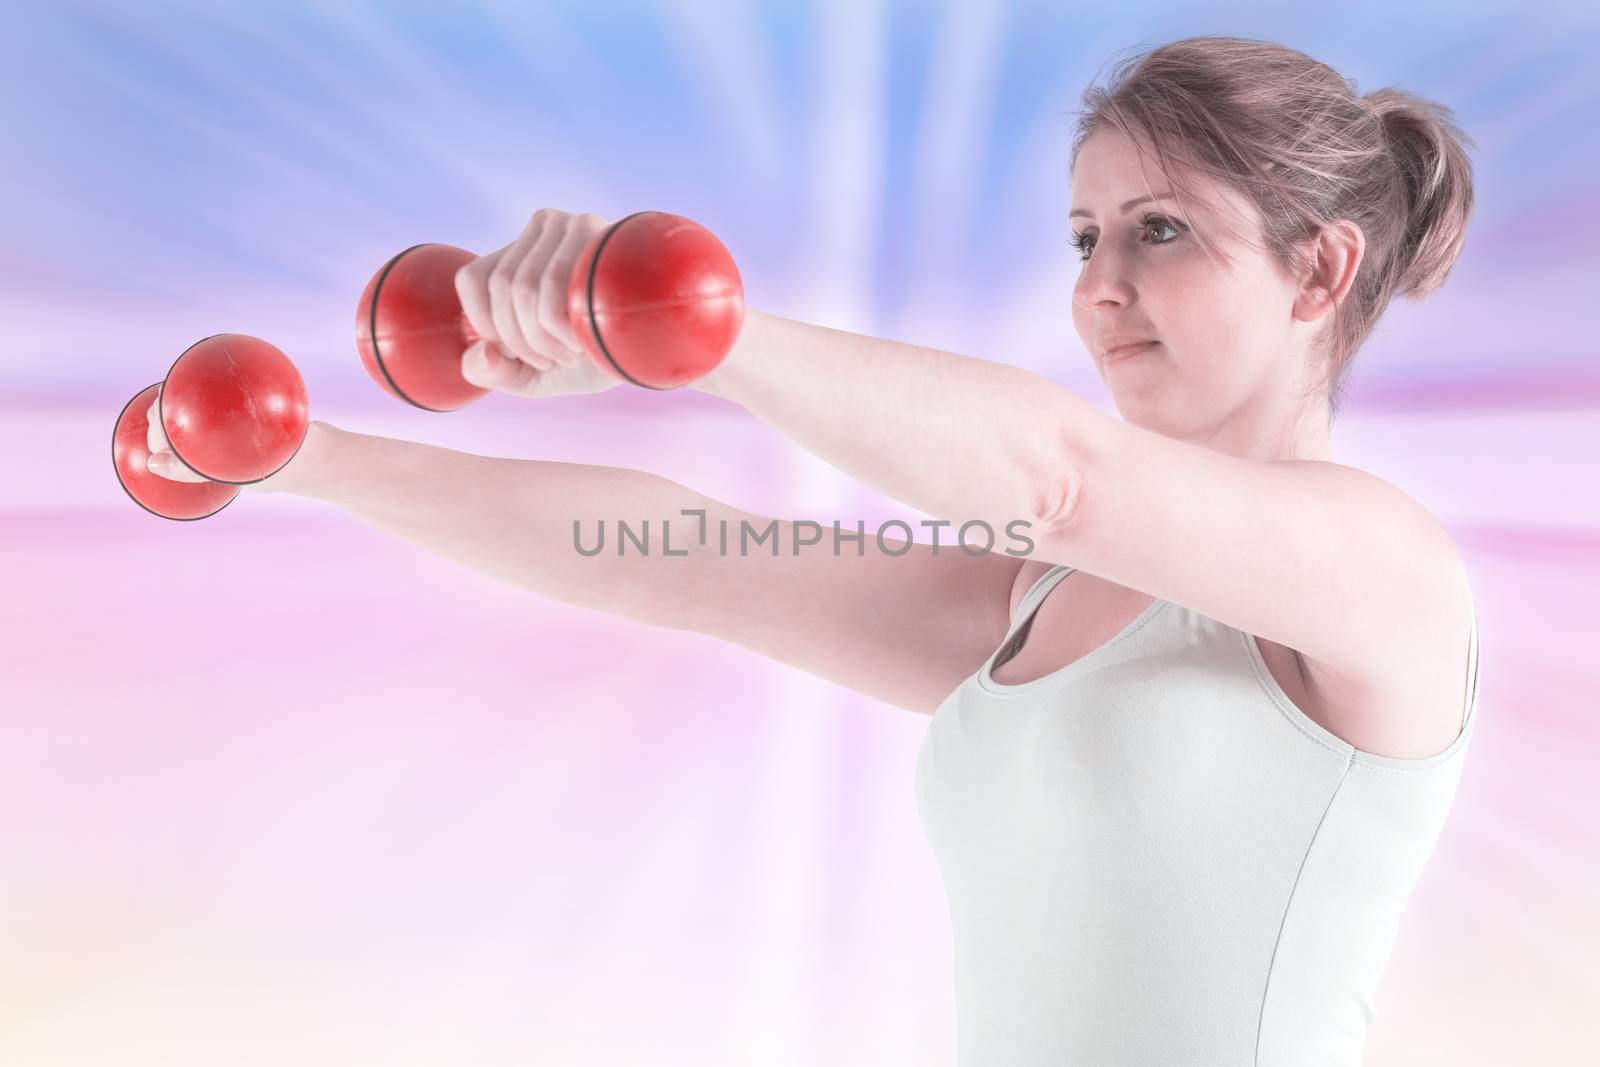 Woman holding weights against abstract background